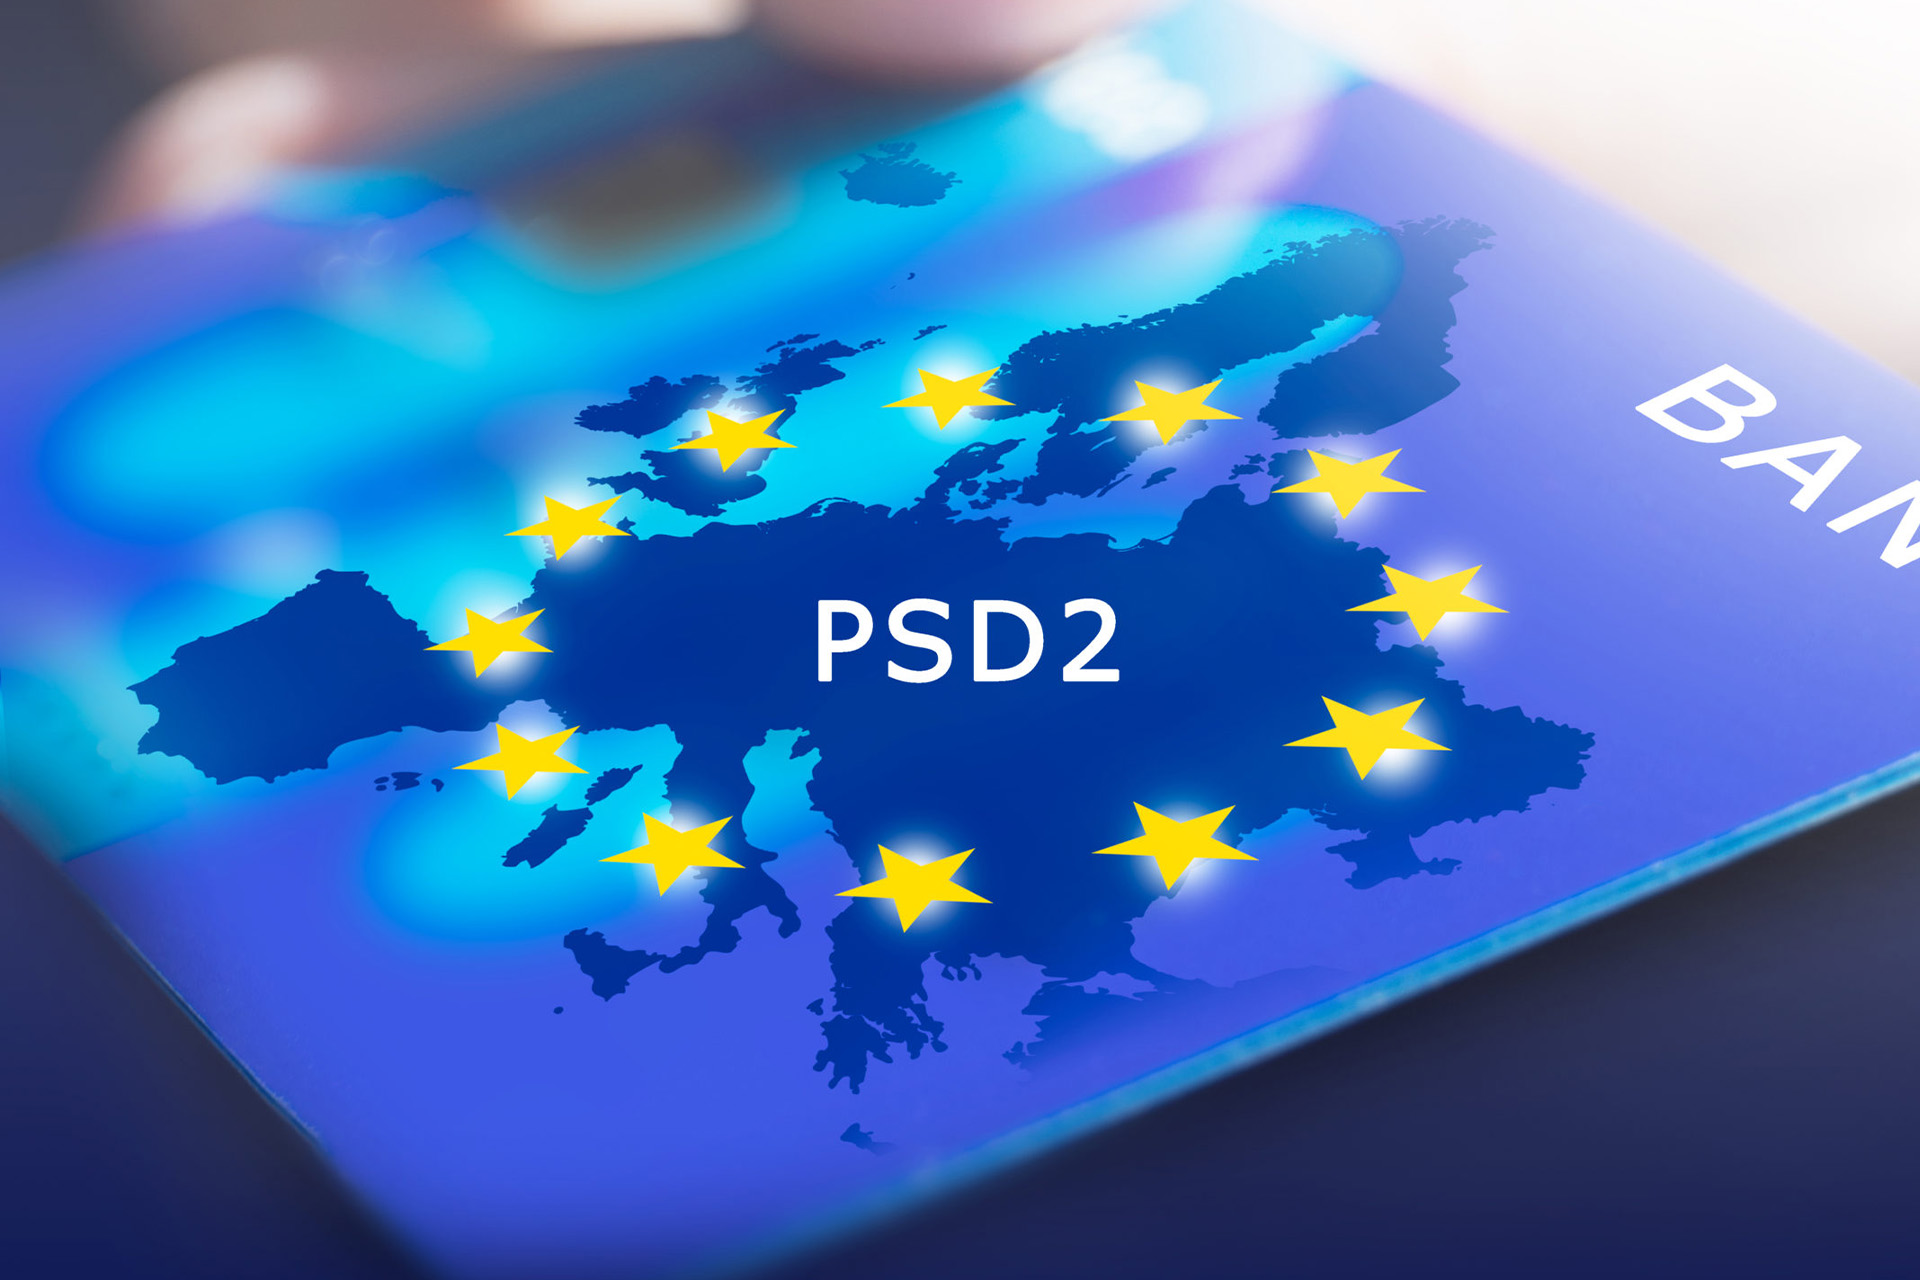 What do you need to be PSD2 compliant?